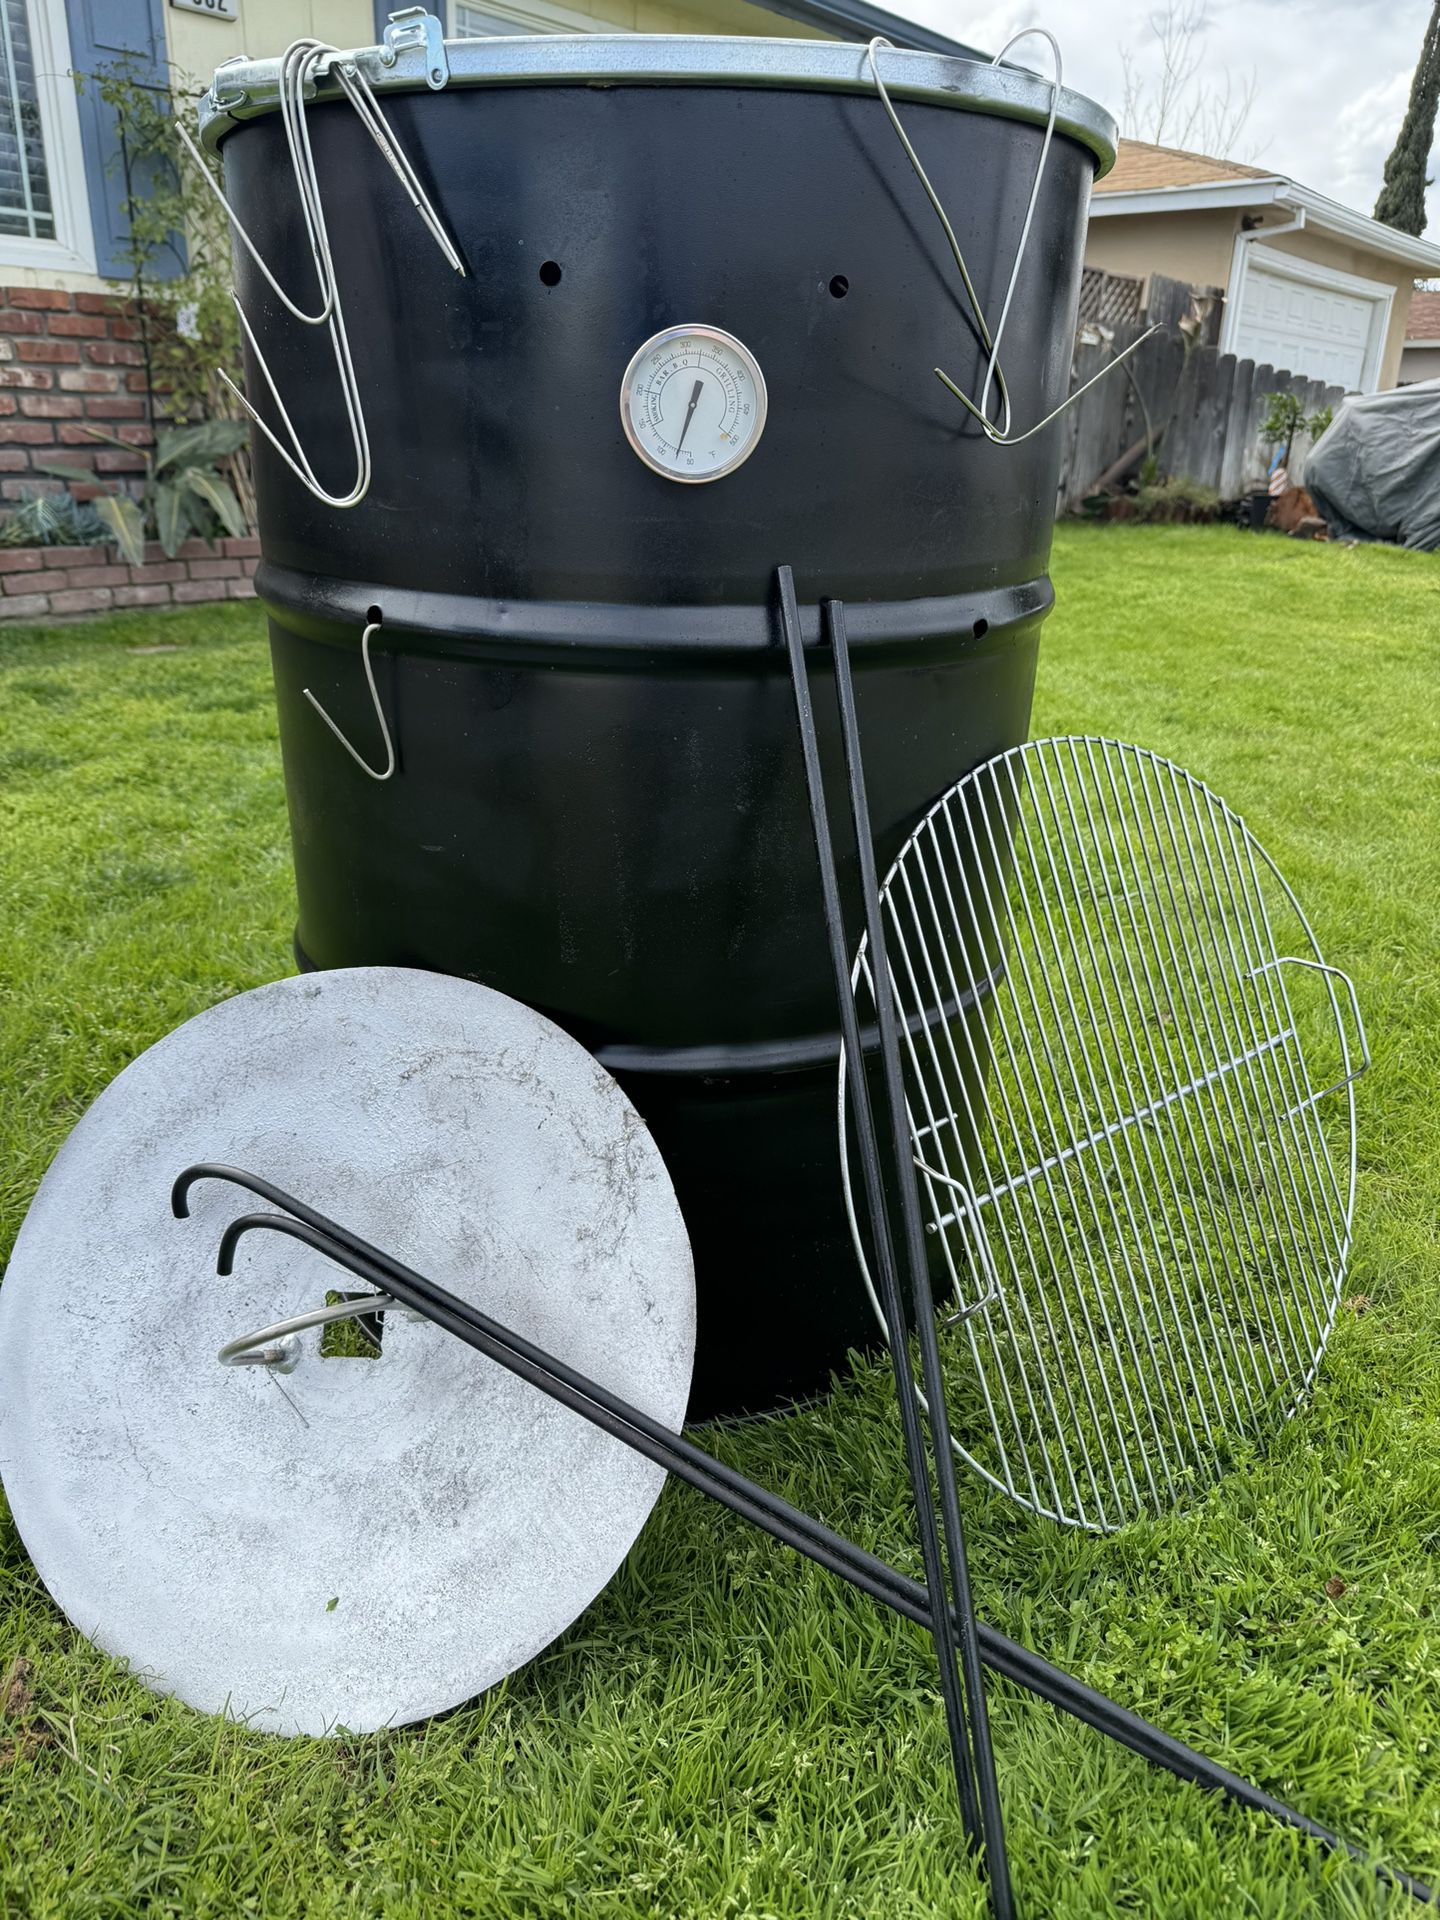 BBQ Smoker 🍗 🍖 Great For Ribs , Tri Tip , chicken 🍗 Salmon🍣 